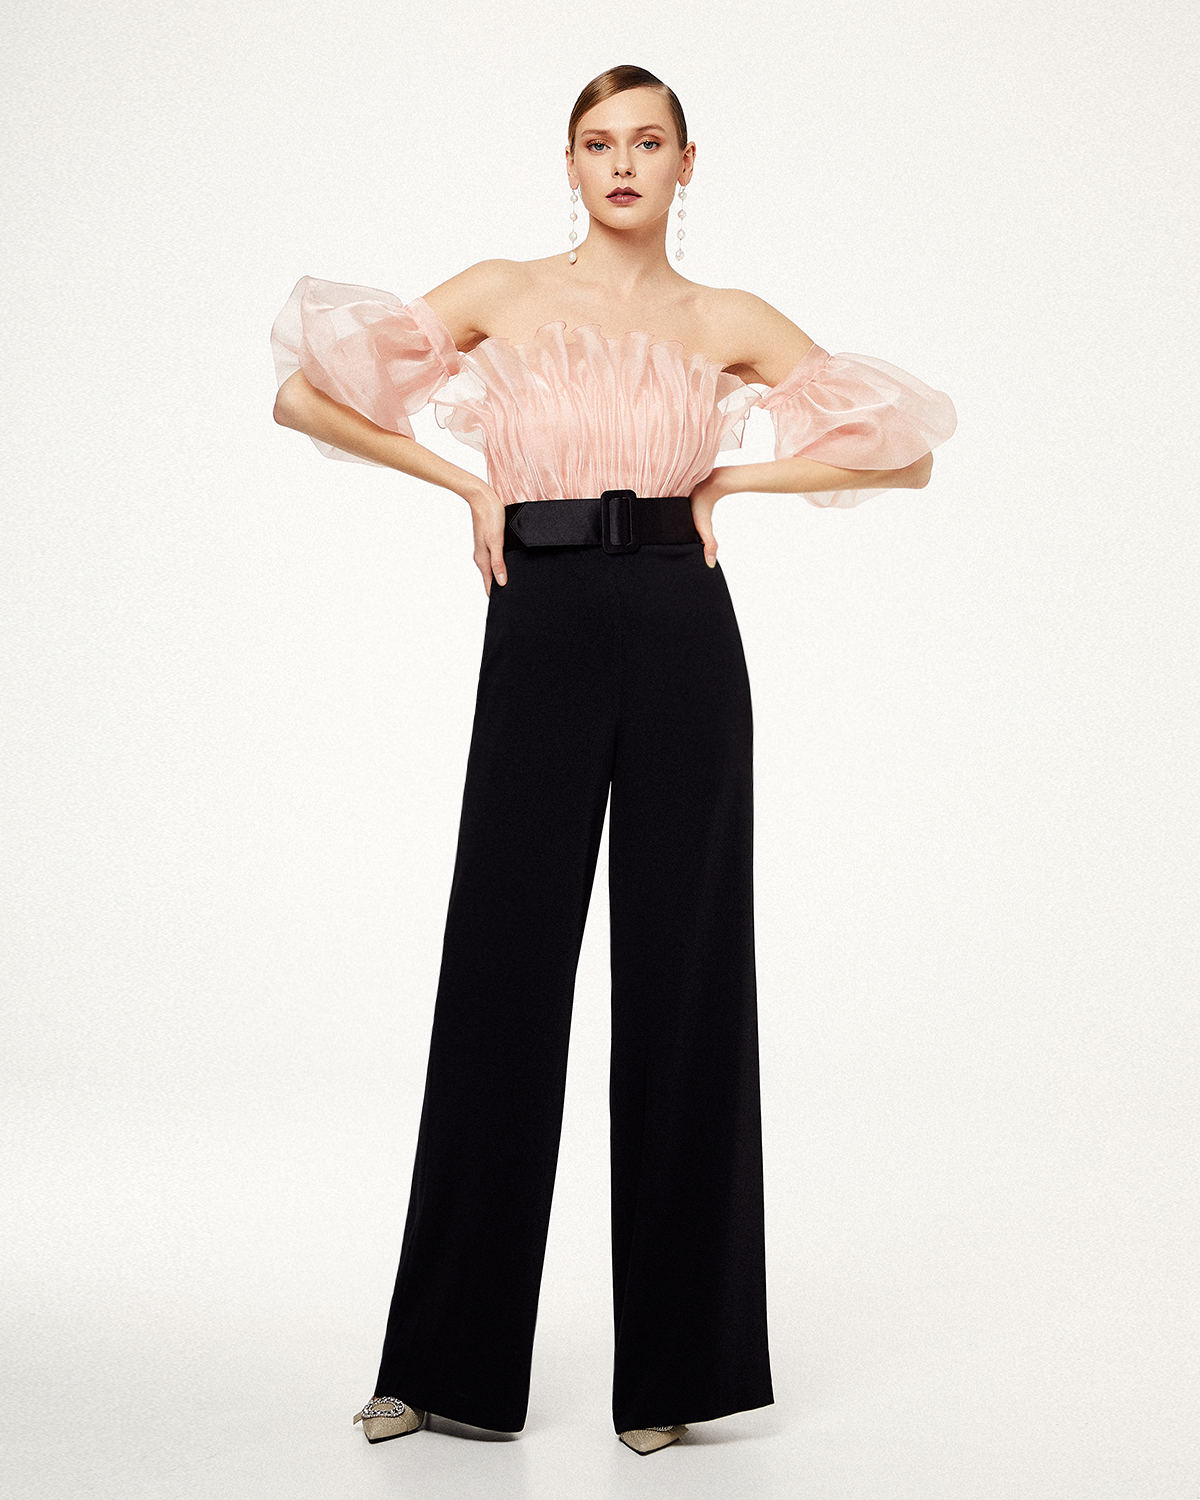 Cocktail Dresses / Cocktail jumpsuit with organza top and belt